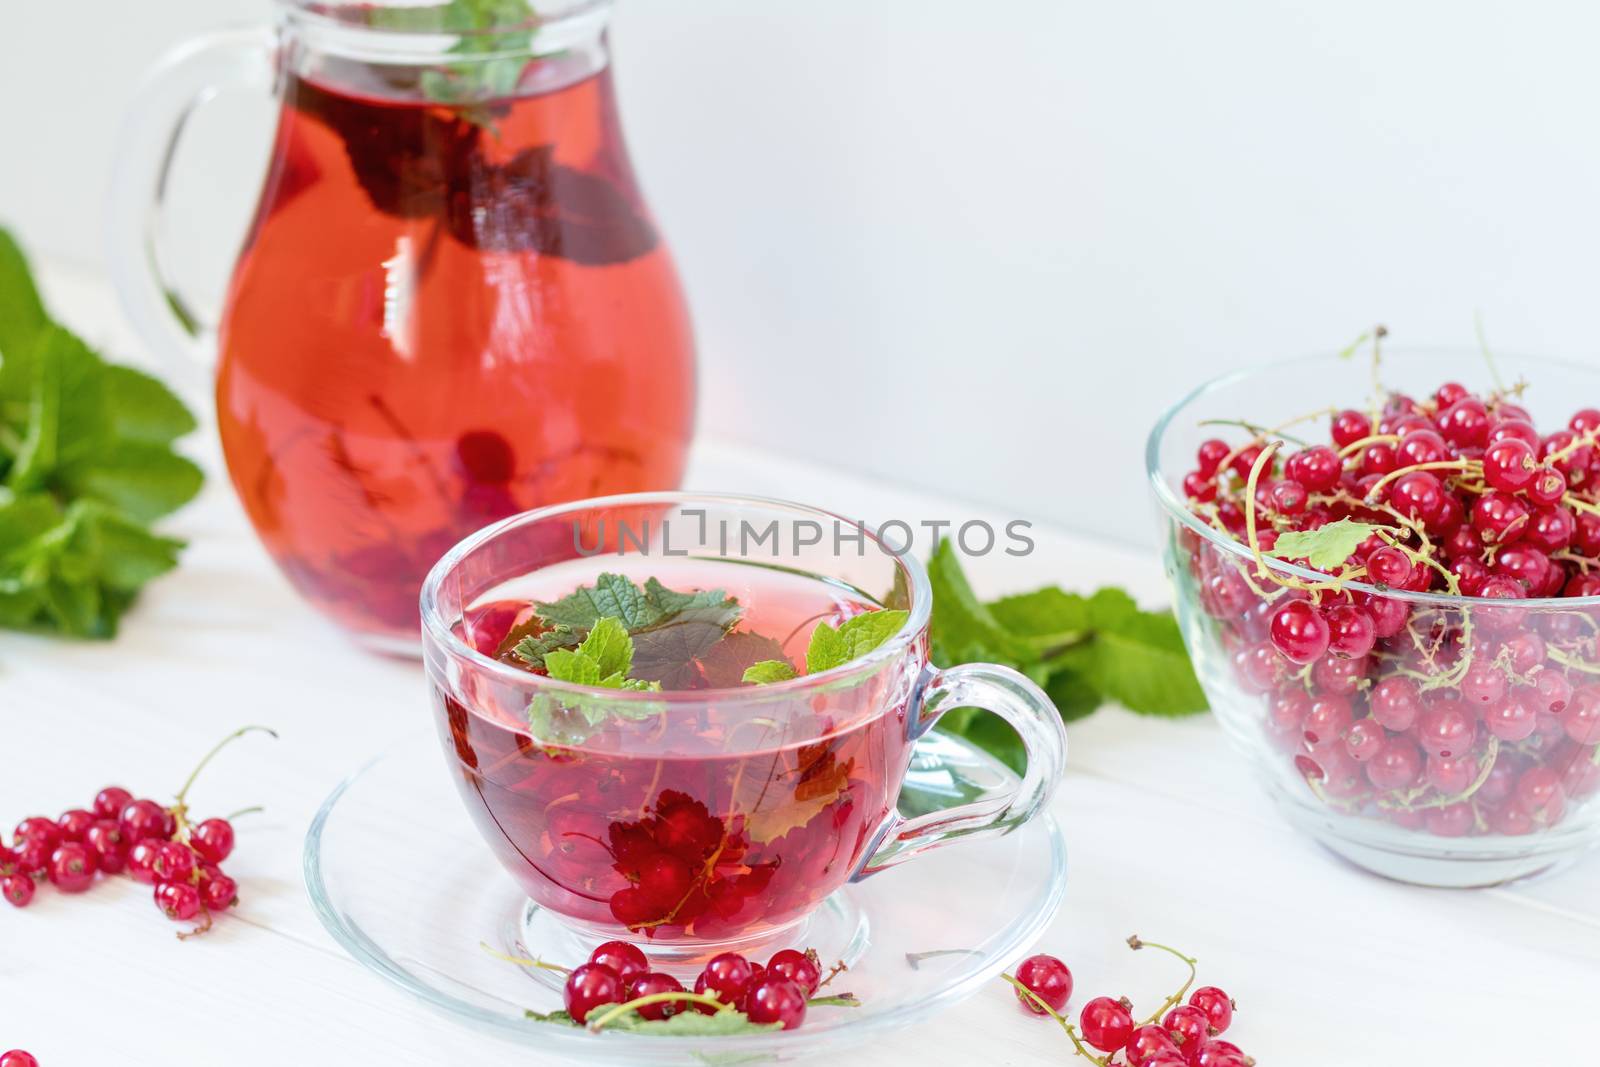 Redcurrant drink in transparent glass carafe and cup. Clear glass vase with red currant berries on the white wooden background